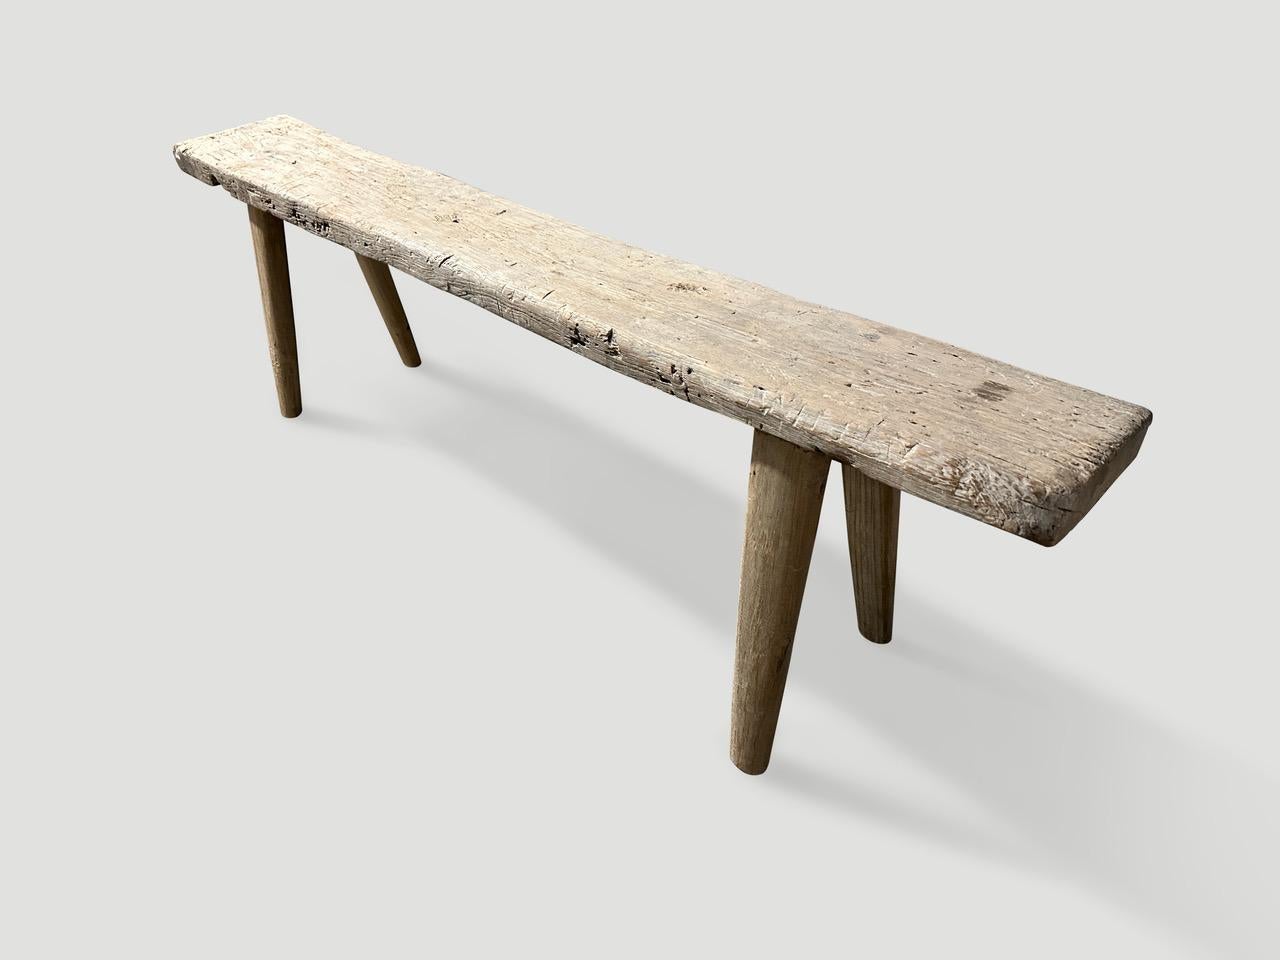 Indonesian Andrianna Shamaris Antique Bleached Teak Wood Bench For Sale